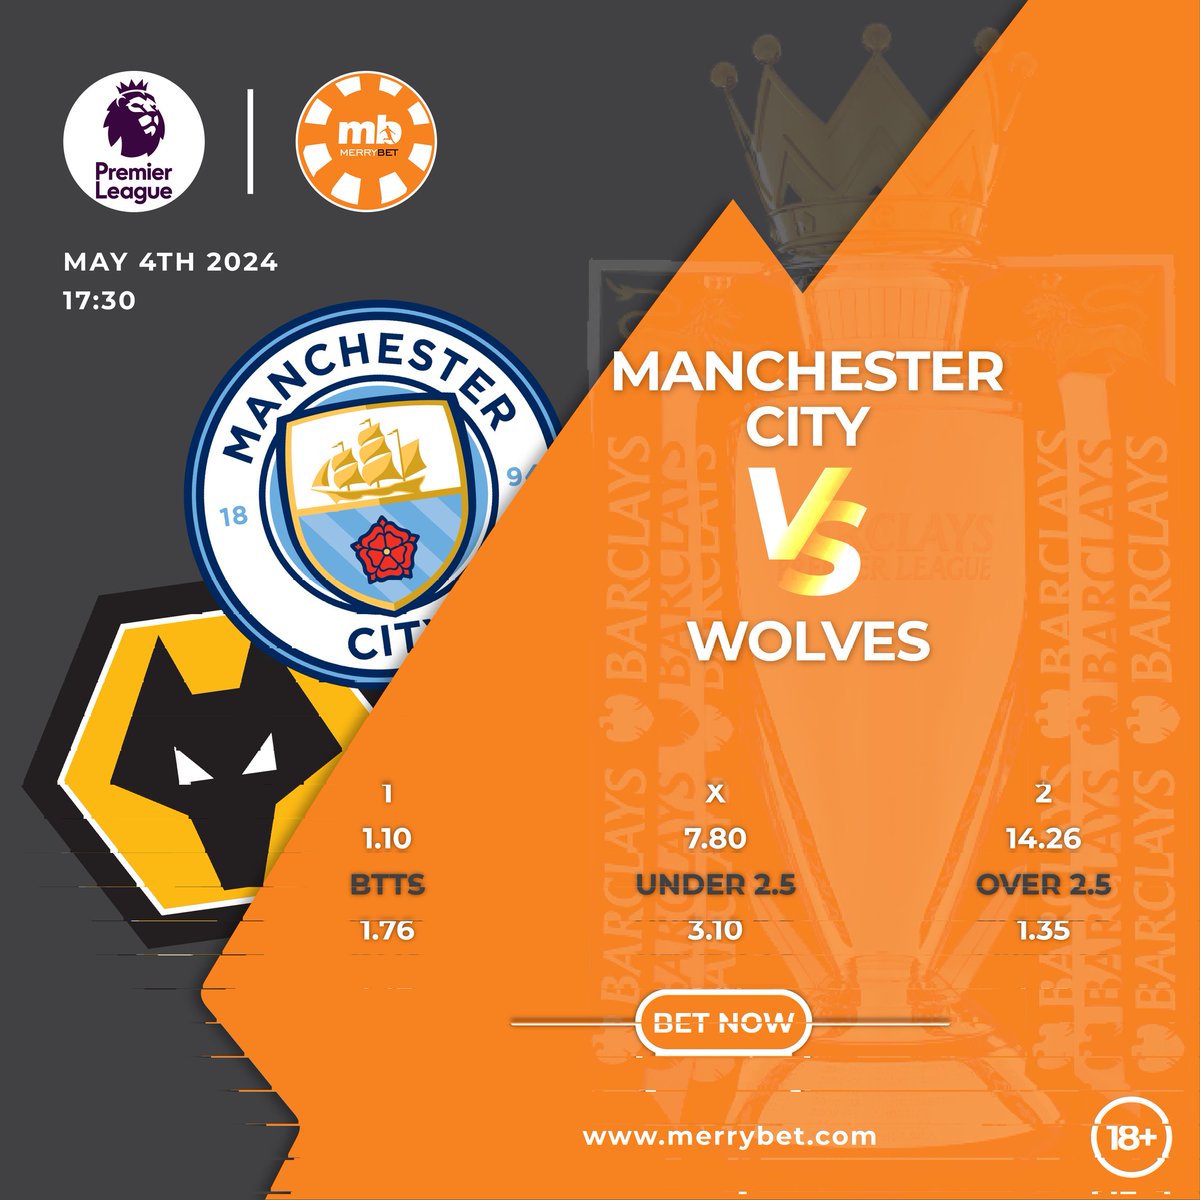 The two-horse race for the #PL title continues! 🥵 All eyes on Man City as they host Wolves in a tricky test at the Etihad this evening ⚽ Get your bets on here ➡️ bit.ly/3JxLhI0 #MCIWOL #PremierLeague #BetNow #Merrybet #whereChampionsplay